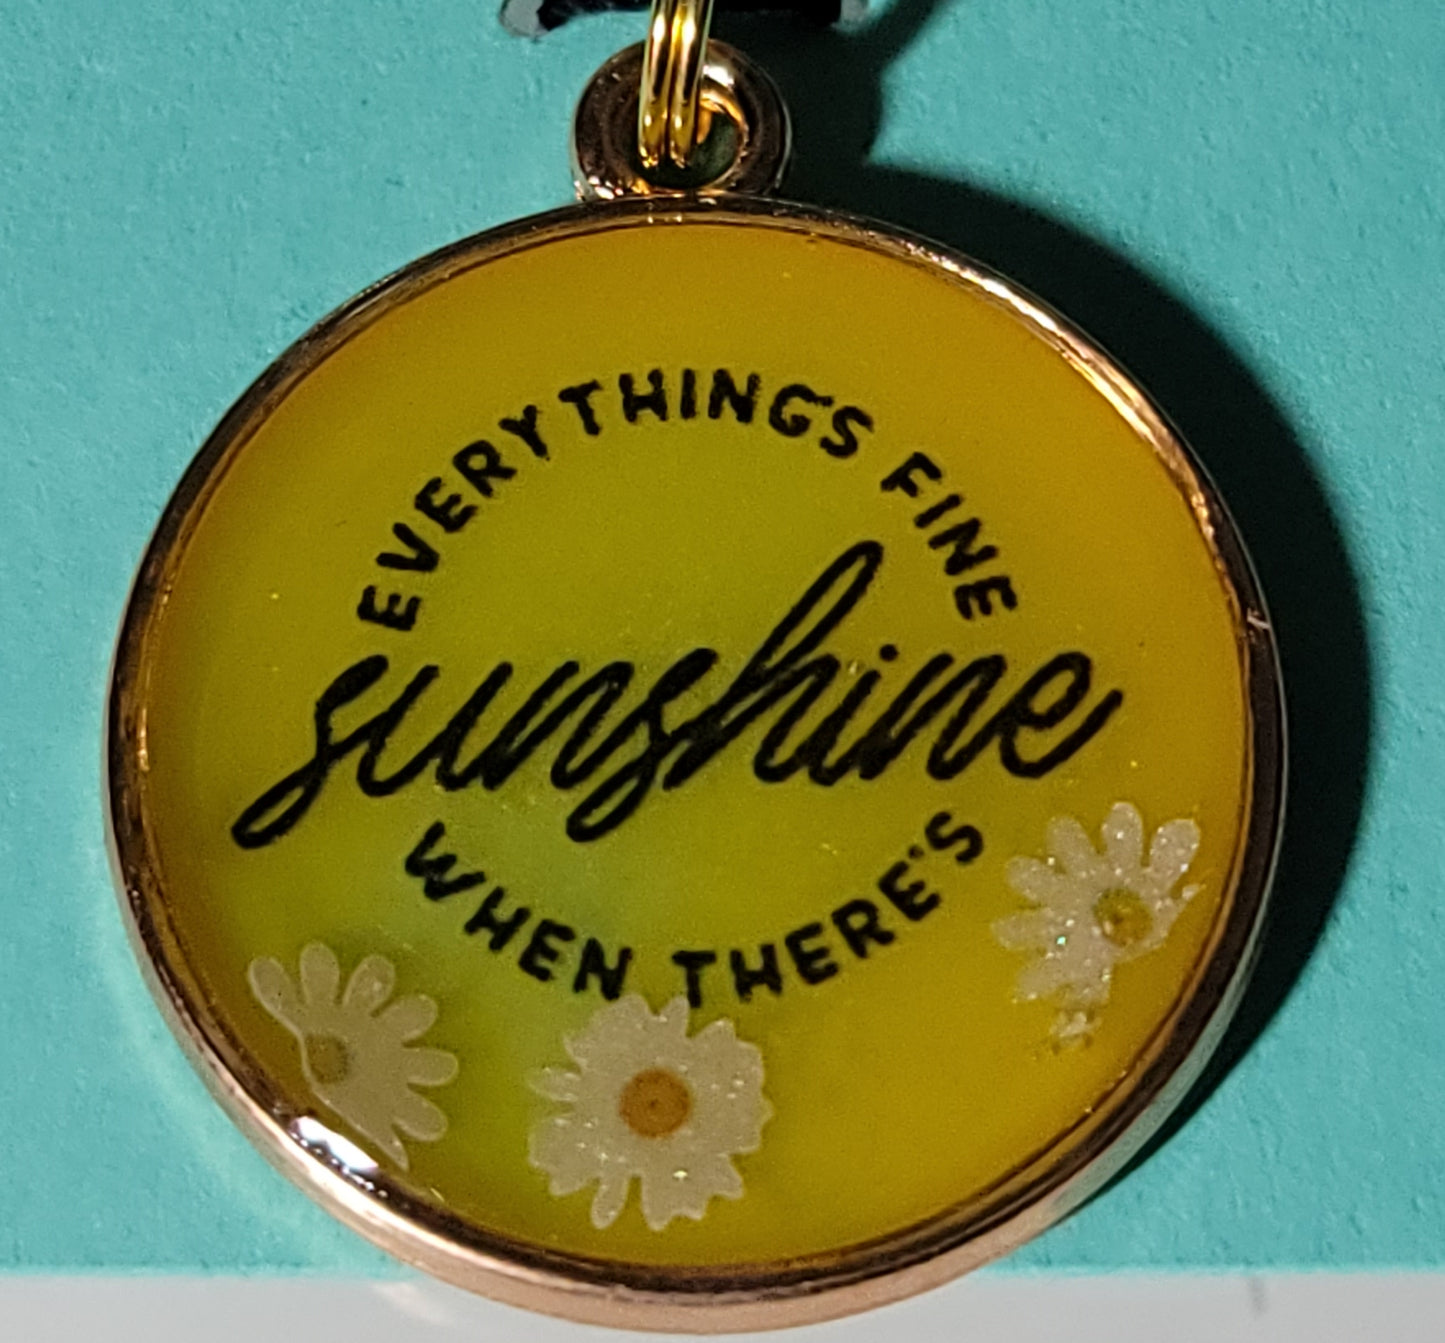 Everything's Fine When There's Sunshine Pendant Charm